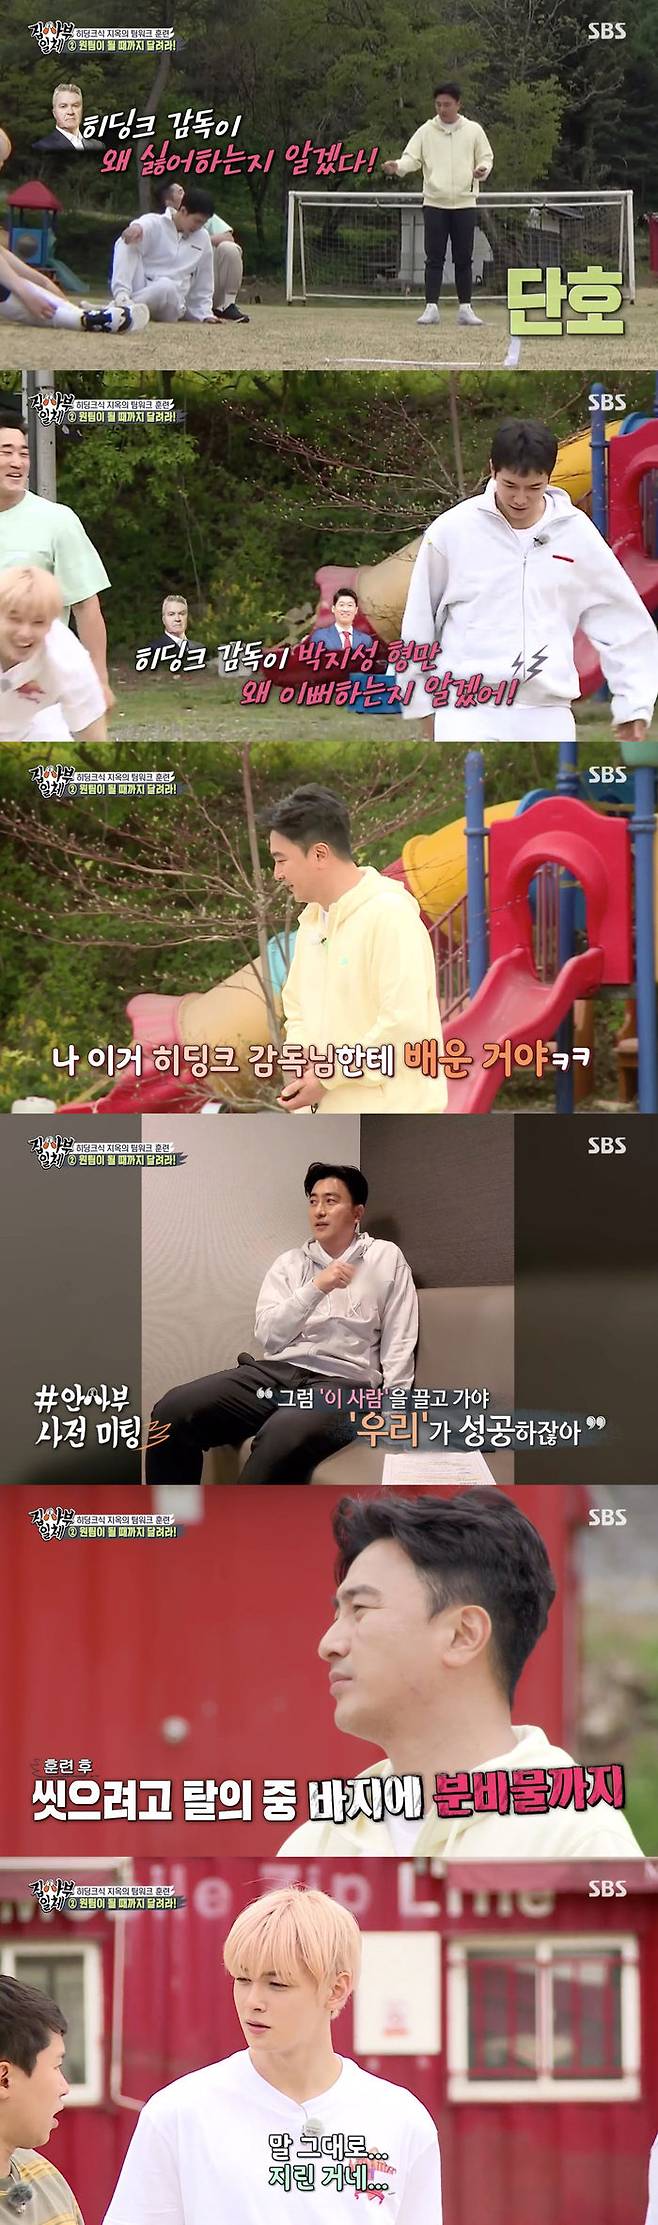 Ahn Jung-hwan reveals anecdote as a playerIn SBS All The Butlers broadcast on the 16th, Master Ahn Jung-hwan conducted training to strengthen national teamwork.The disciples gave a bow to Master Ahn Jung-hwan, who said he would continue until he succeeded in the broadcast.Nevertheless, Ahn Jung-hwan did not stop and the dissatisfaction of the disciples exploded.In particular, Kim Dong-Hyun said, I know why Hiddink director hates it. Lee Seung-gi also laughed, saying, I think Hiddink director knows why Park Ji-sung is pretty.Master Ahn Jung-hwan then caught the eye by saying, This is all I learned from Hiddink.Lee Seung-gi said in an interview, I actually did not know why. I had to have a purpose when I was doing something, but I did not see the purpose.Master Ahn Jung-hwan said, There are some slow people when we run together, and then we have to drag slow people to succeed.If you can not play, you have to drag it to succeed together. It is very happy and rewarding to be able to do it together. The disciples asked Master Ahn Jung-hwan what it would have been harder when he was a player; so Ahn Jung-hwan said, Yes.I have seen Honeydew many times when I was so hard that I tried to wash my bottoms after training or competition. Then Cha Eun-woo laughed and laughed, I literally got tired.